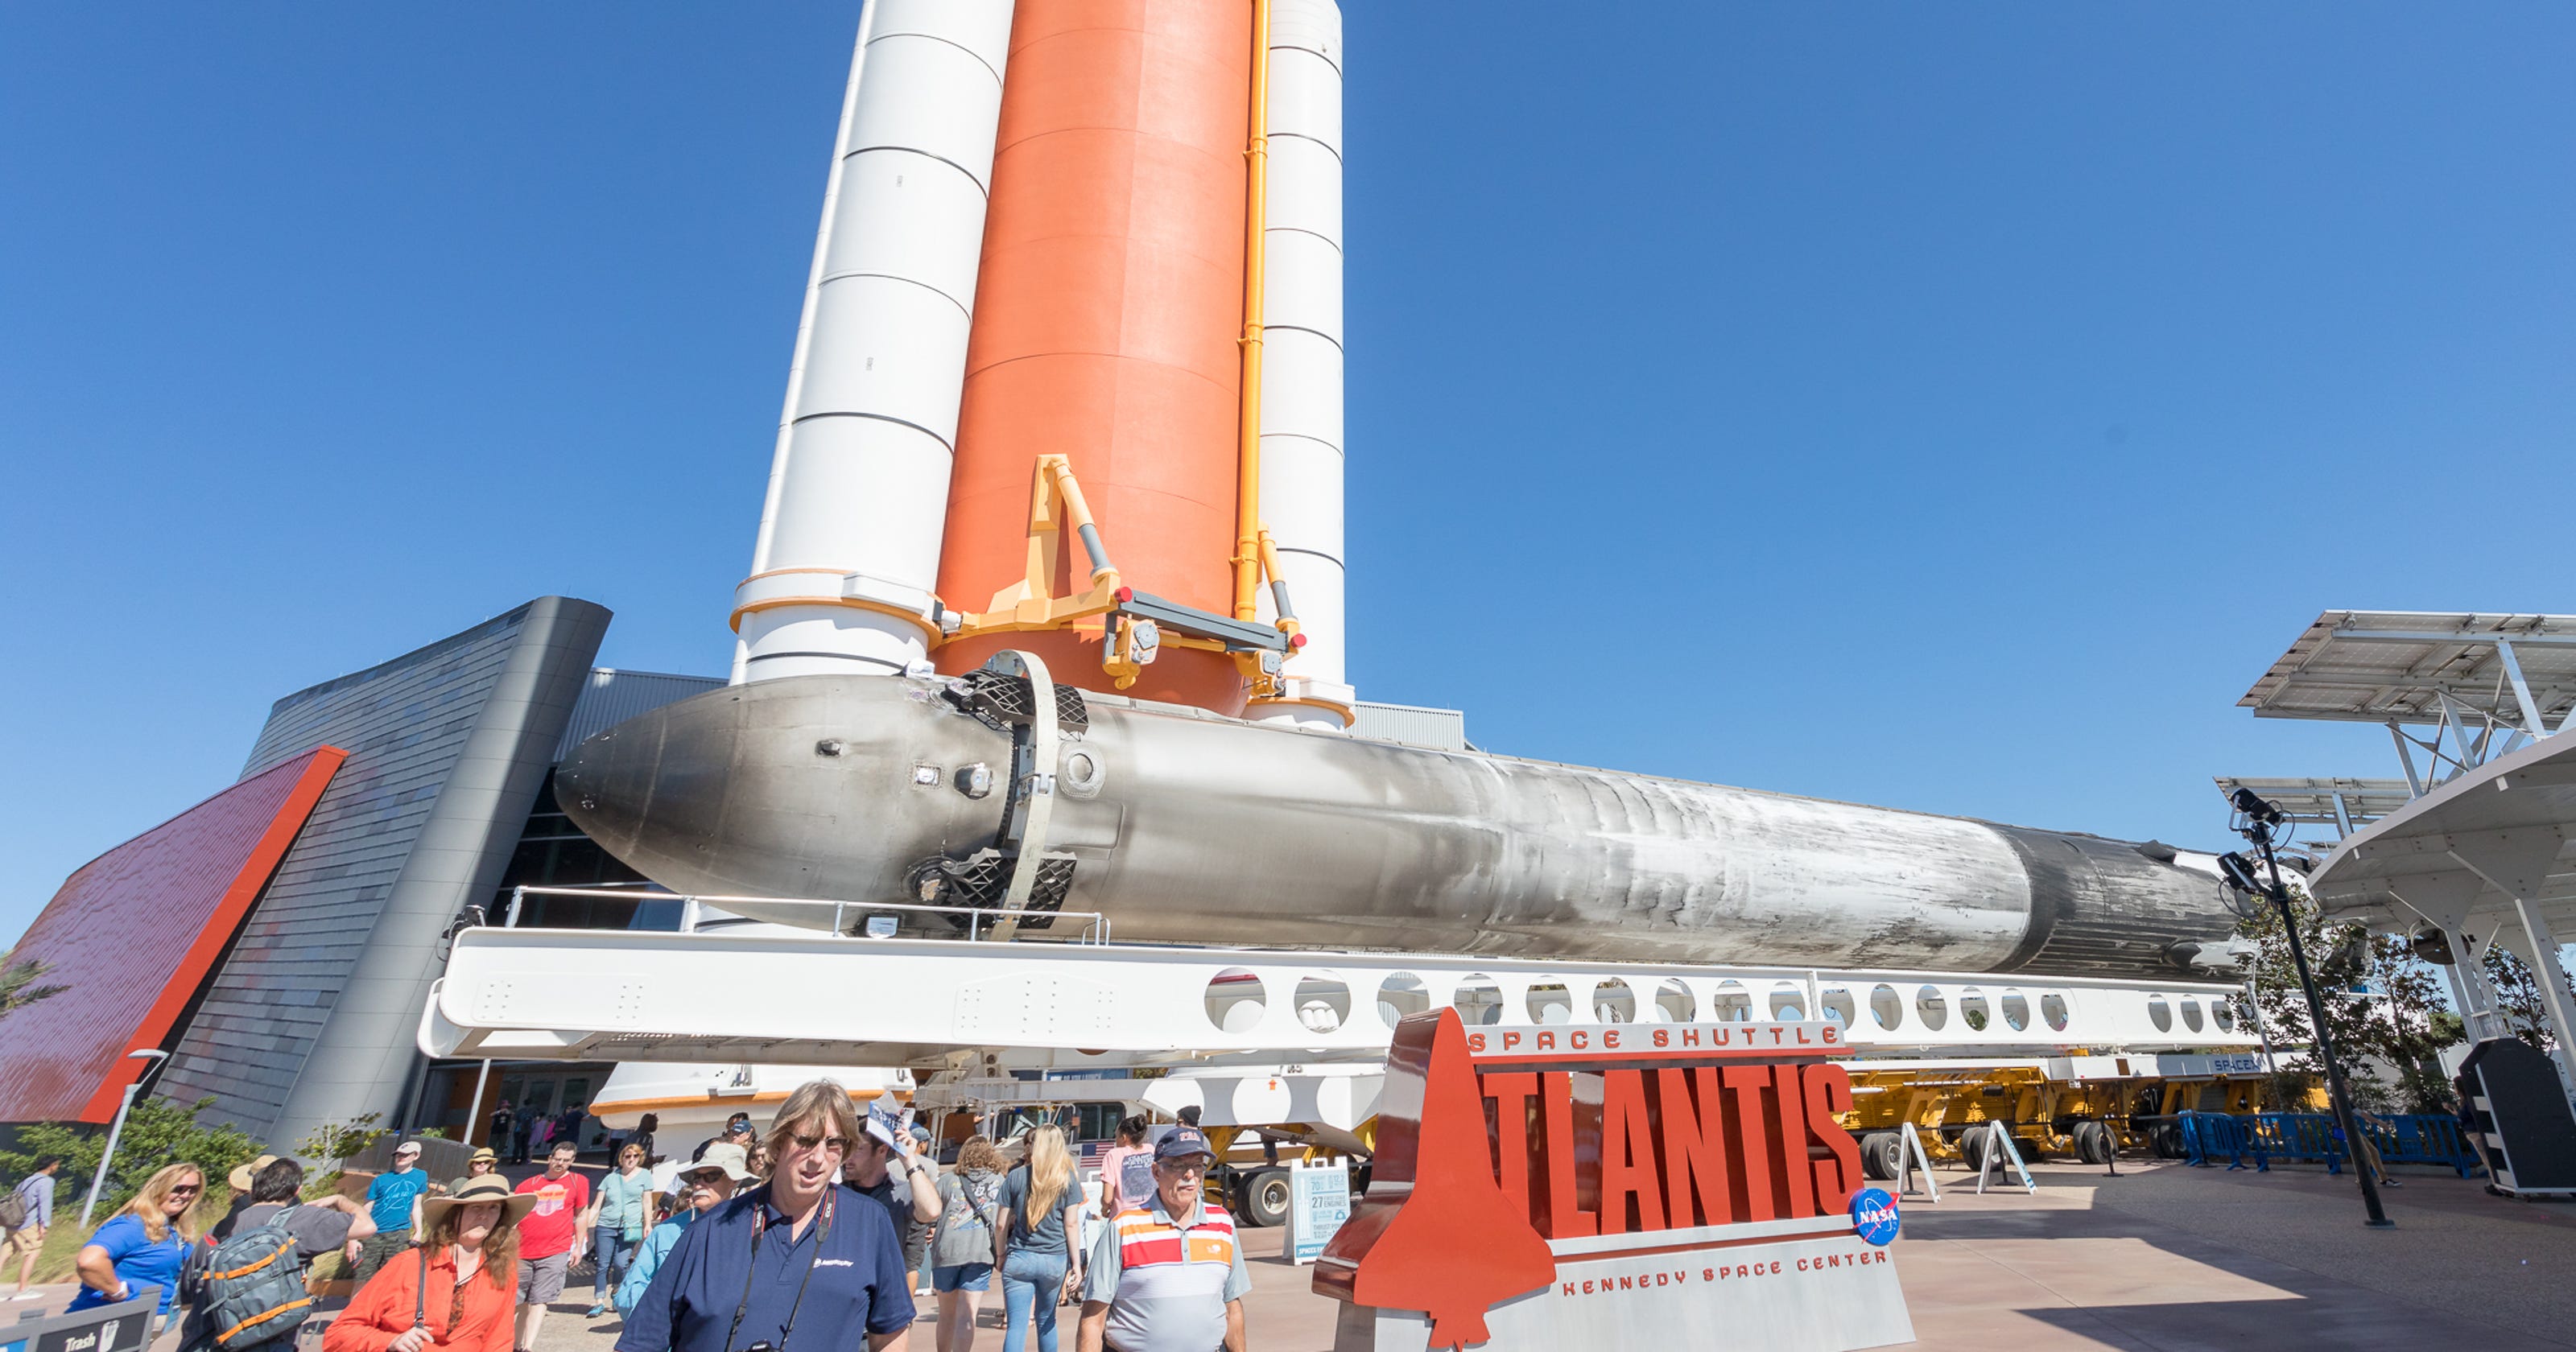 5 new additions to look forward to at Kennedy Space Center Visitor Complex